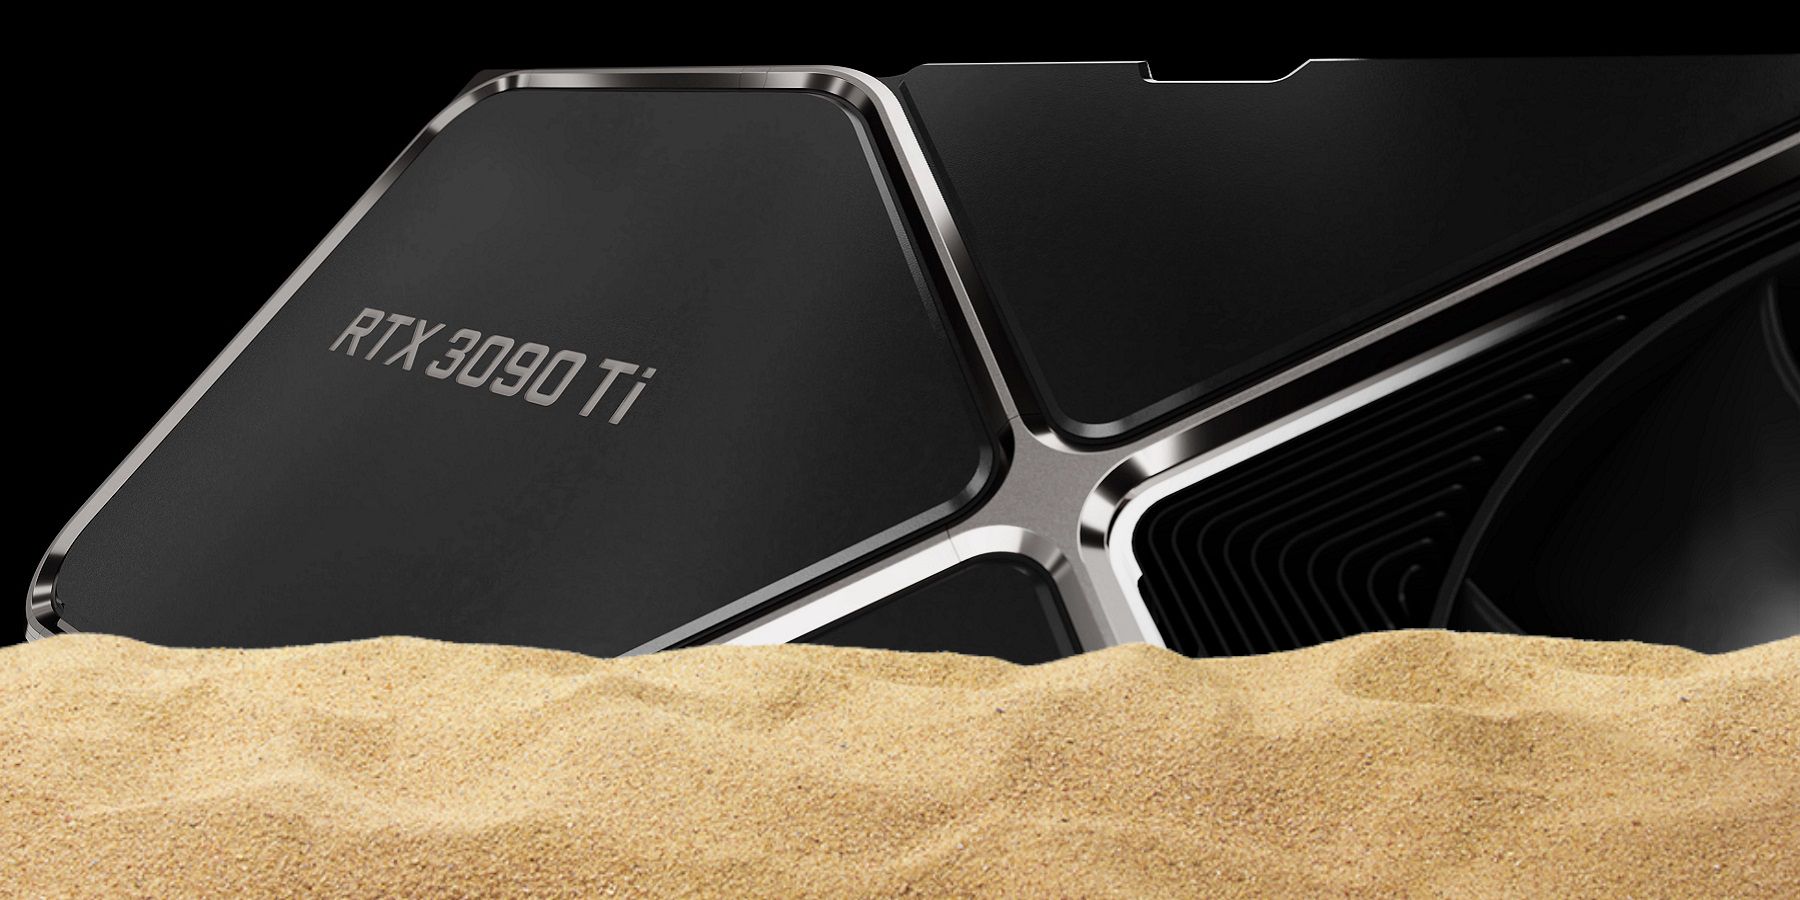 Close-up image of an Nvidia RTX 3090 Ti graphics card with some sand in front of it.